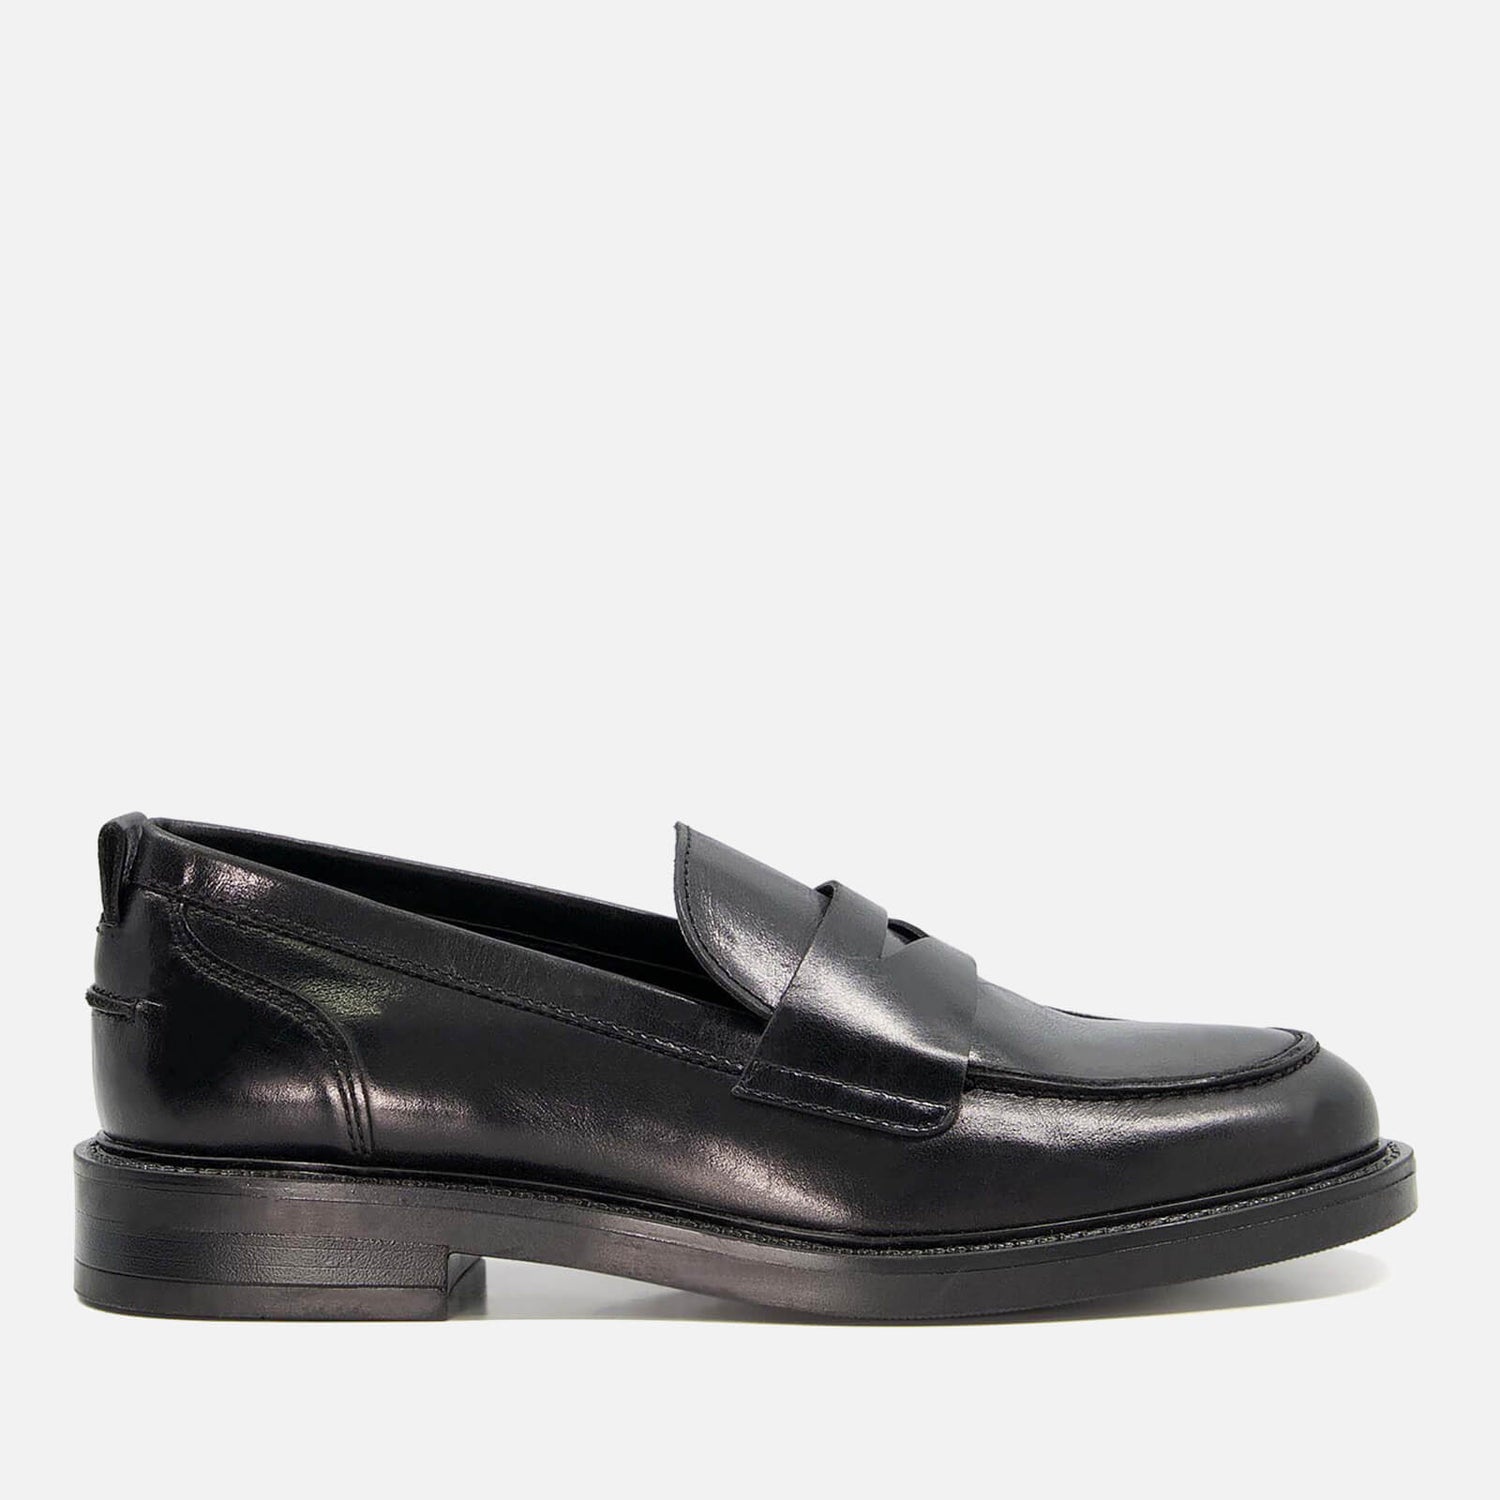 Dune Women's Geeno Leather Penny Loafers - UK 3